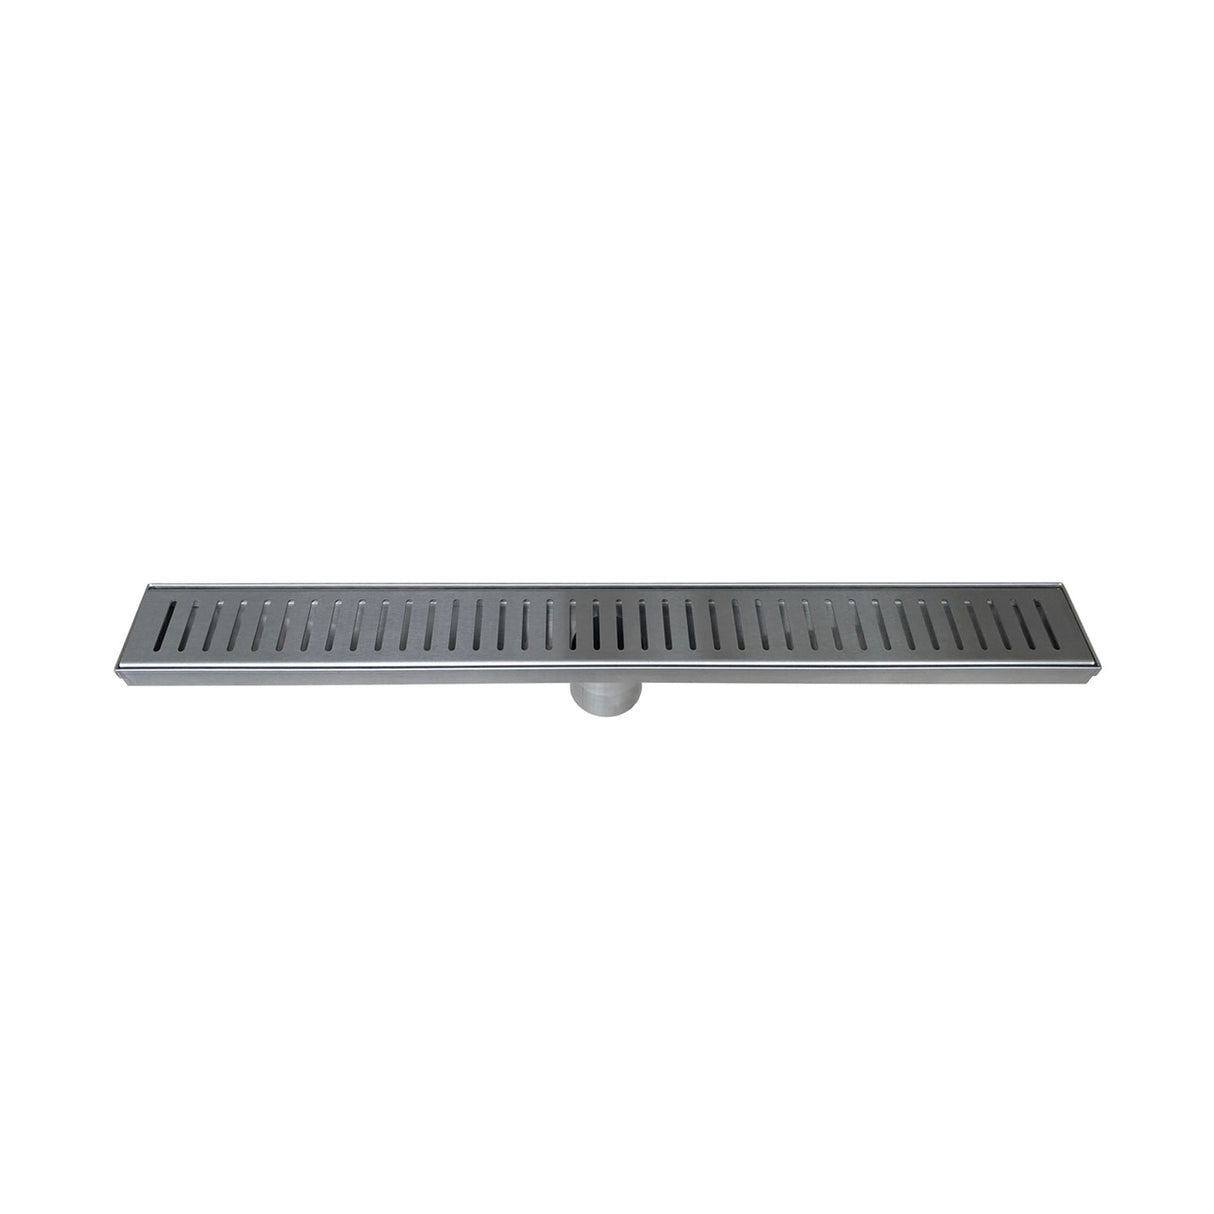 DAX Stainless Steel Rectangular Shower Floor Drain with 18 Gauge, 24", Polished DR24-G06